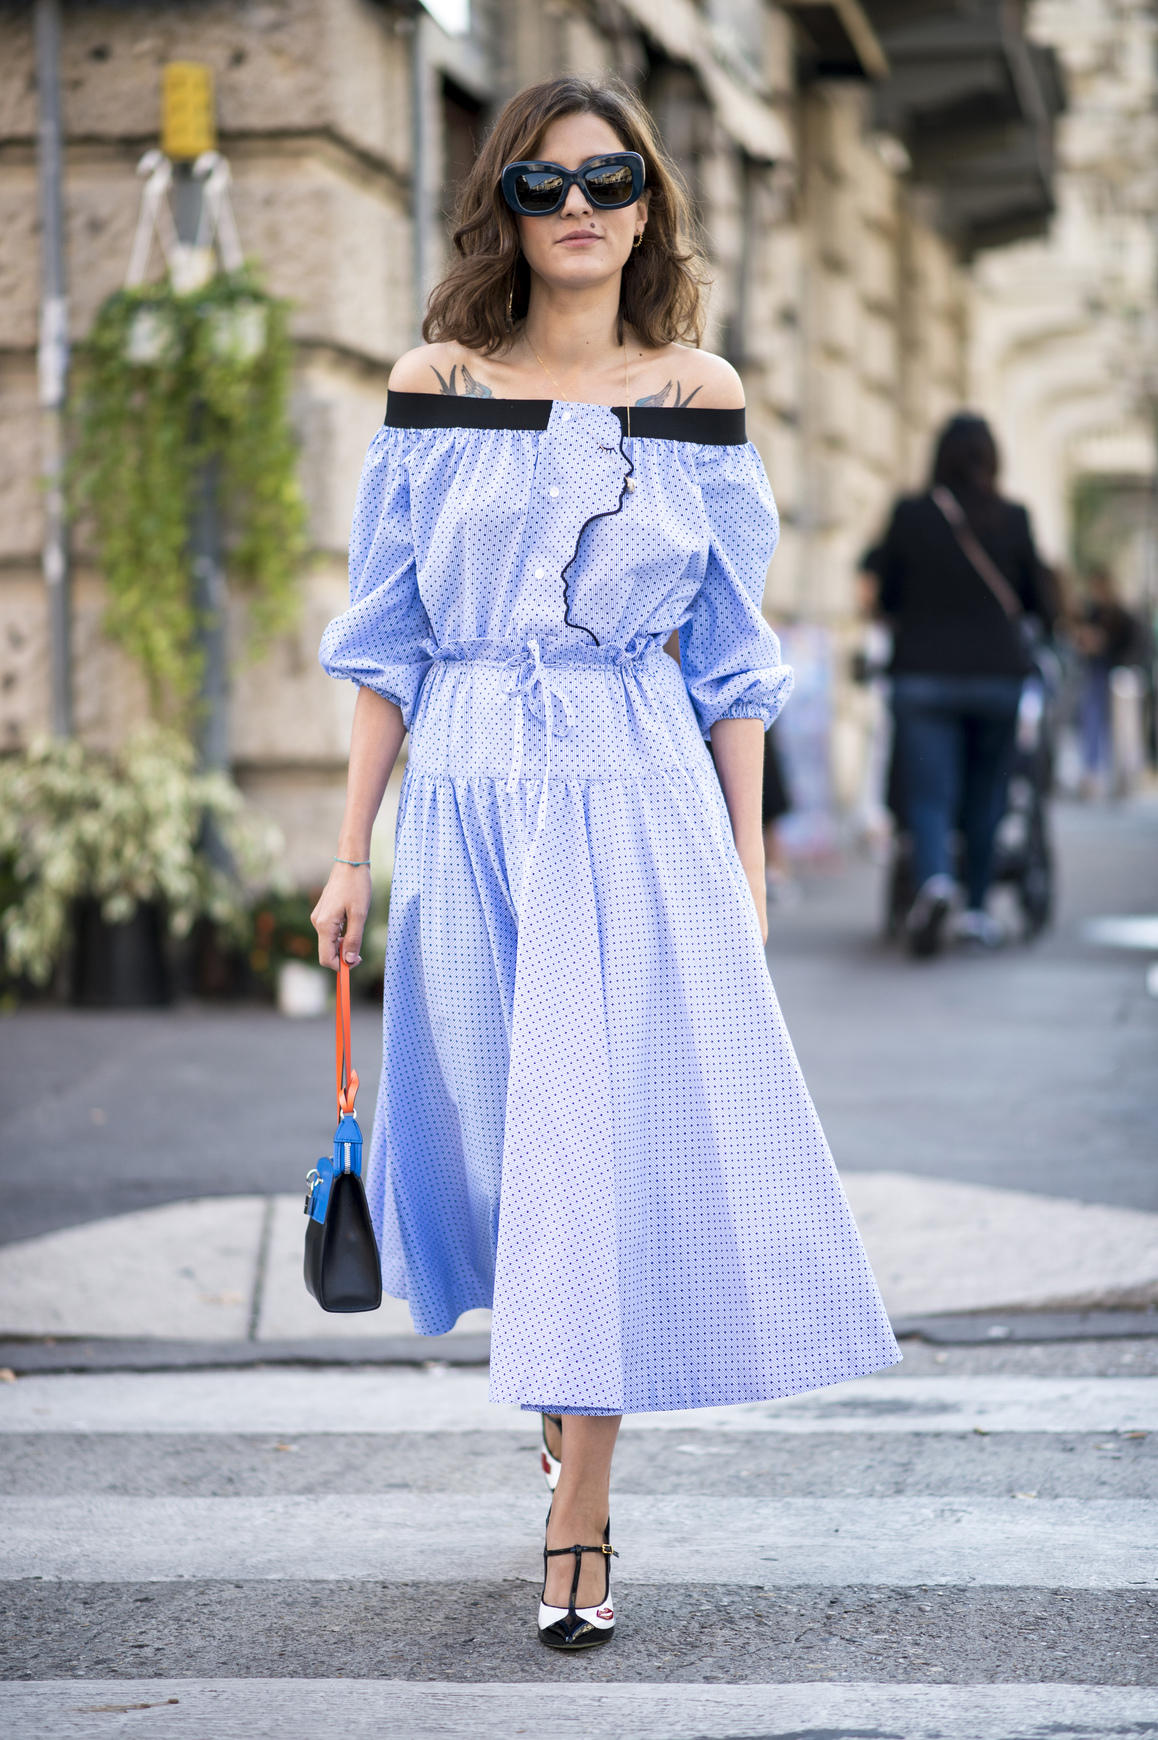 How to Wear the Off-the-Shoulder Trend in Style